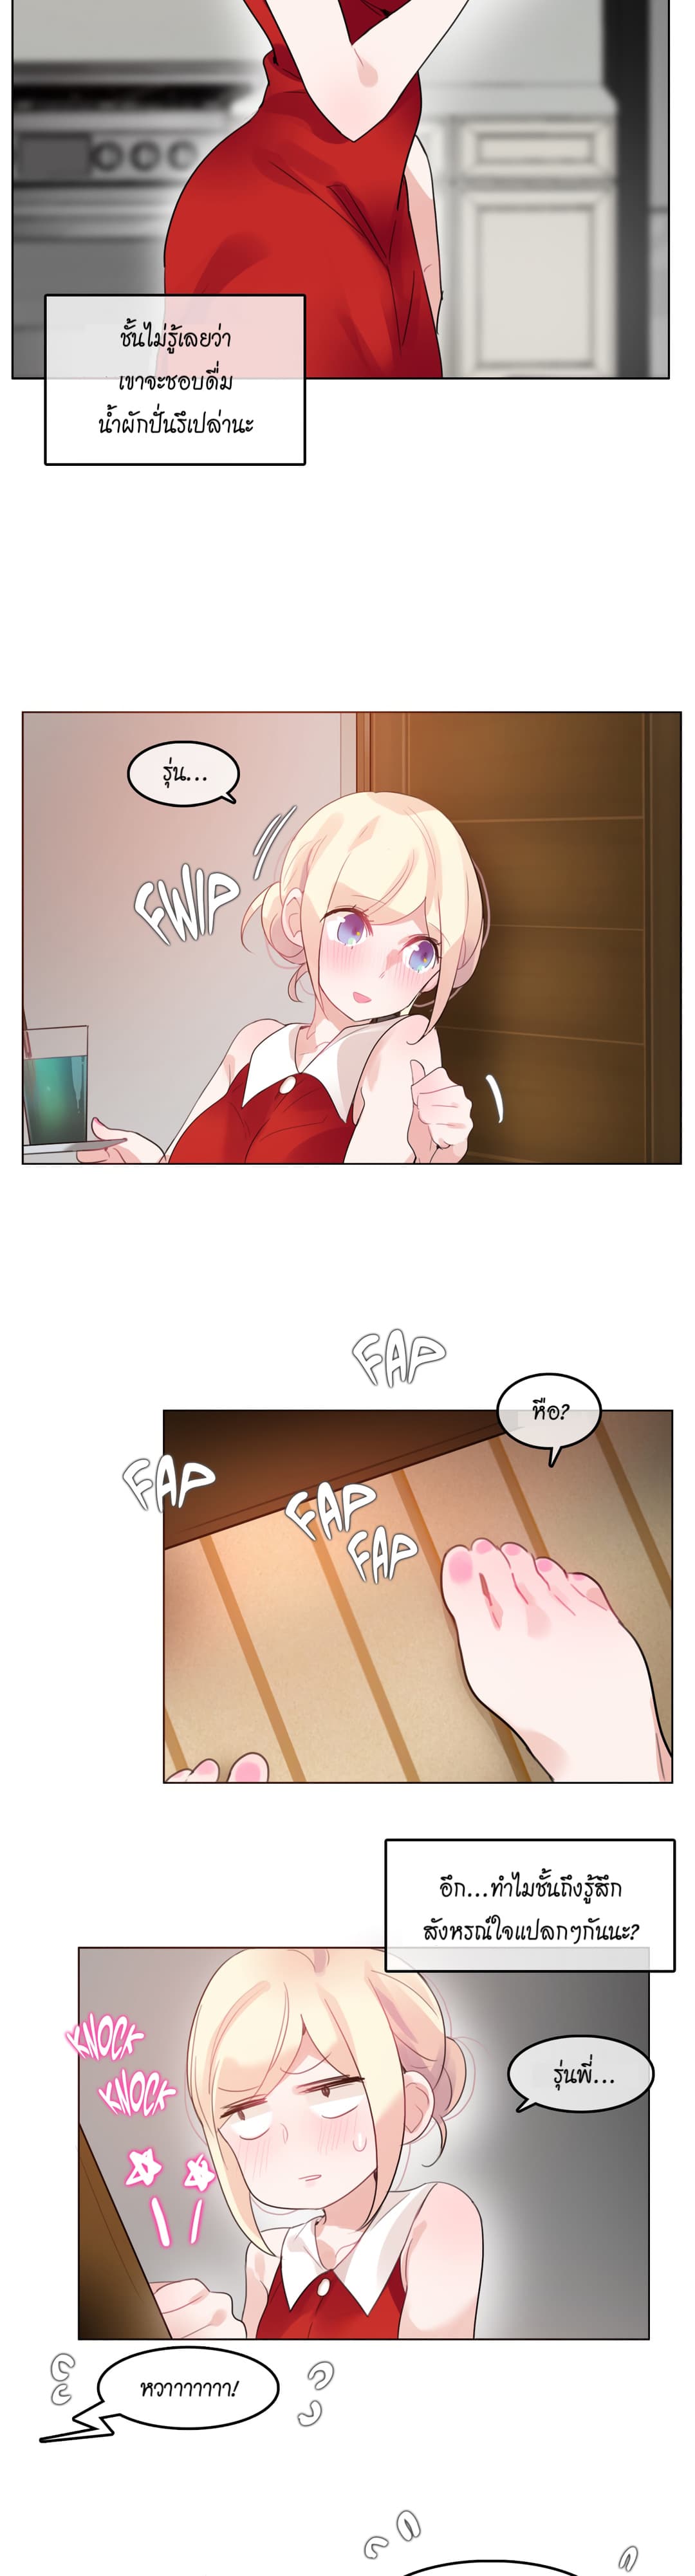 A Pervert’s Daily Life 37 (11)